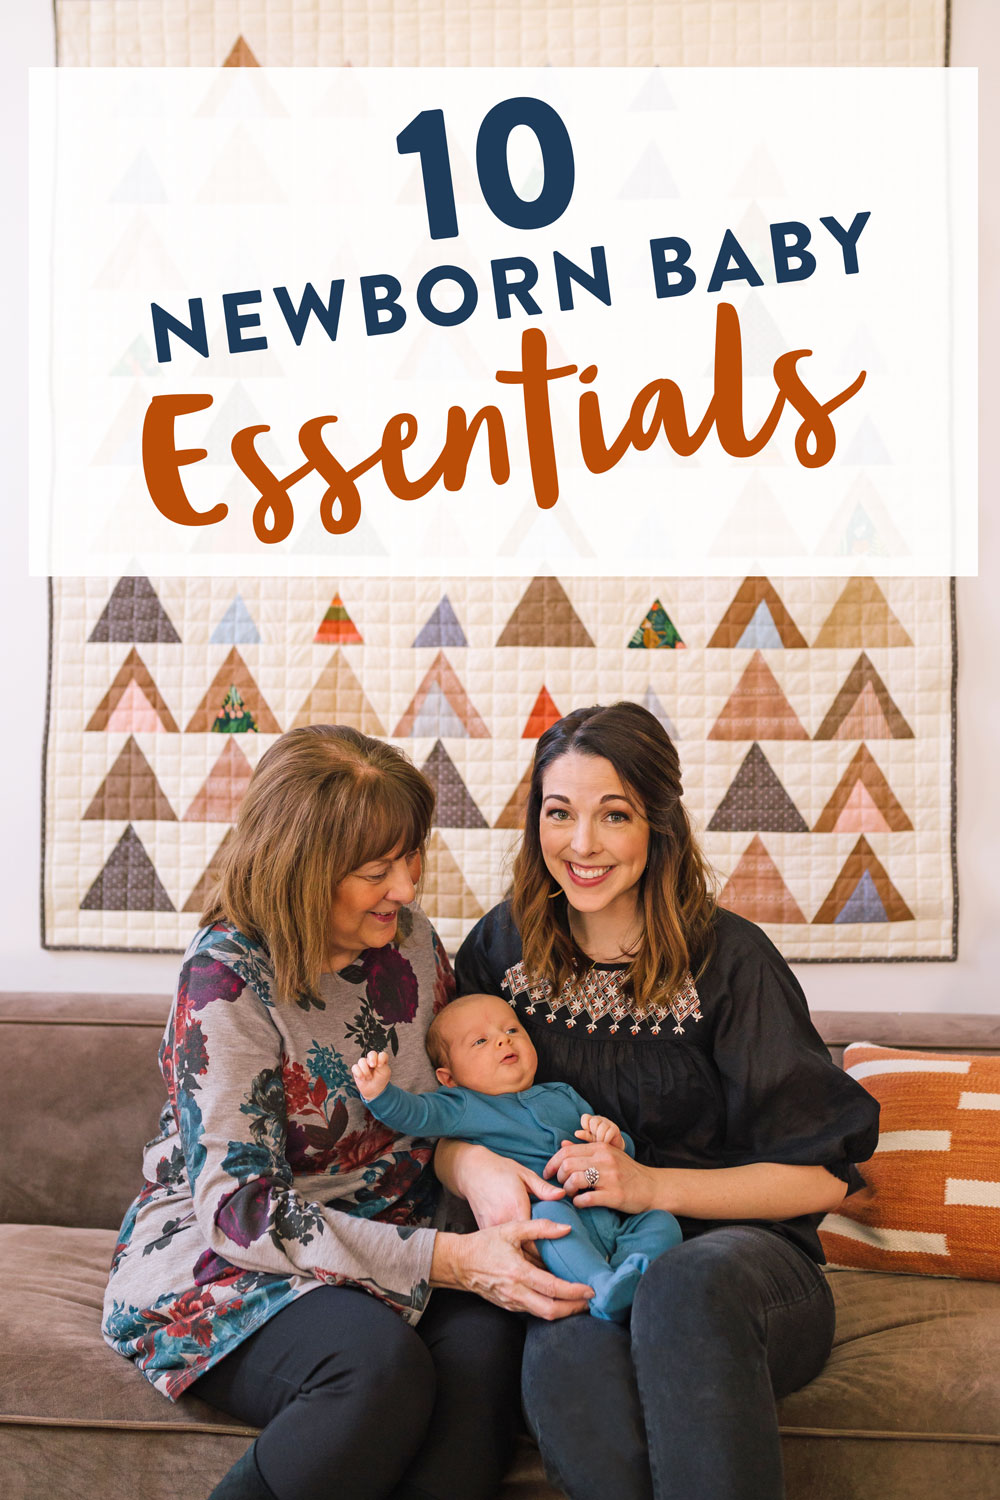 The 10 newborn baby essentials every first time mom should put on their baby registry